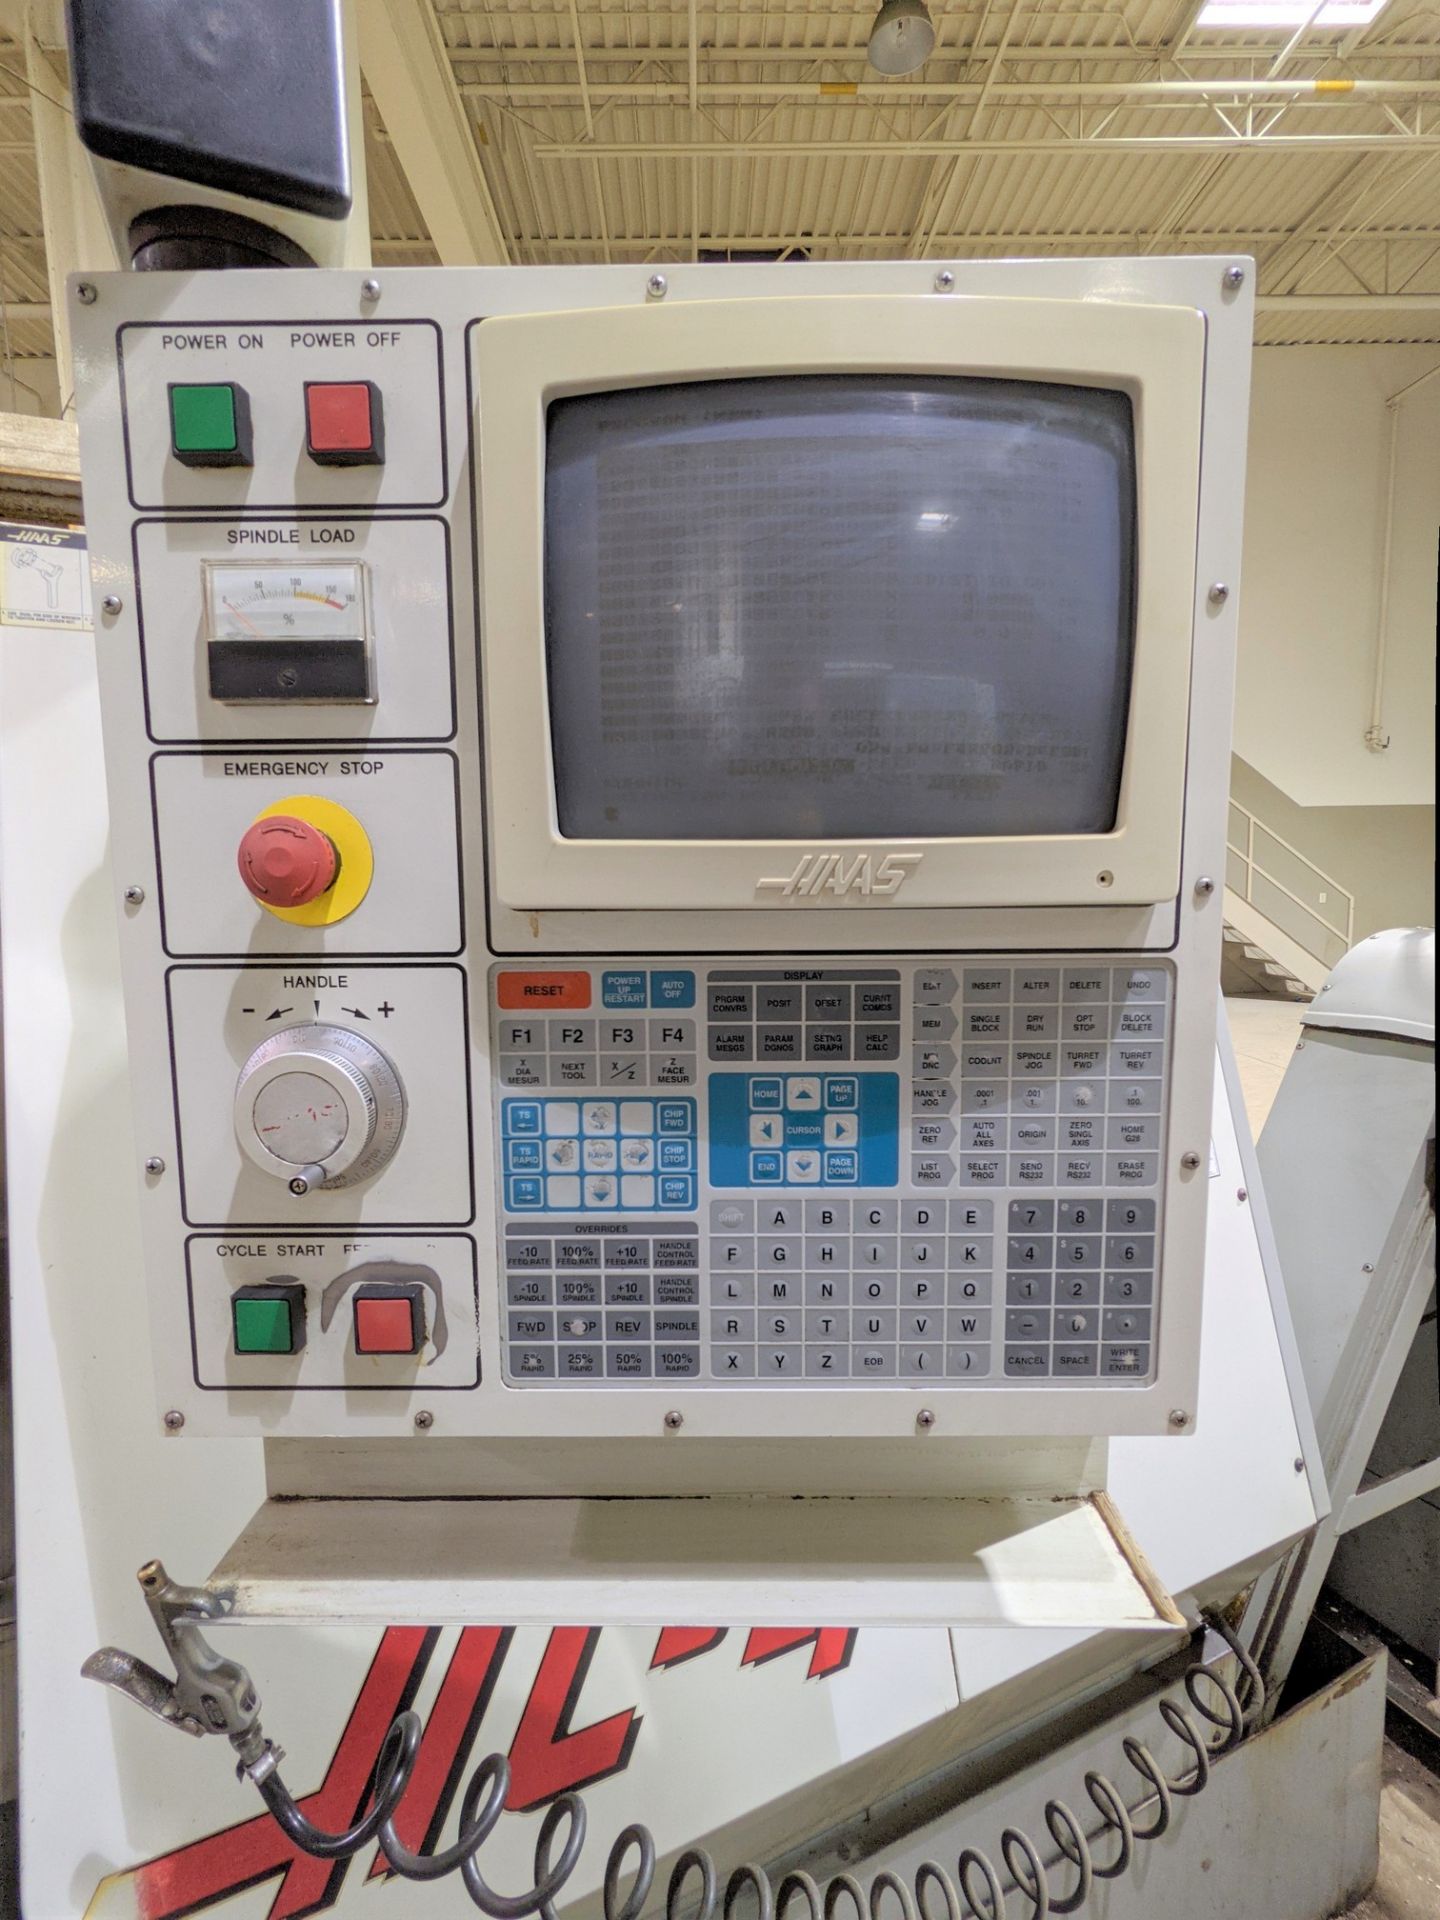 HAAS HL4 CNC LATHE, S/N 61664, CNC CONTROL, 10” 3-JAW CHUCK, TOOL PRESETTER, 12-STATION TURRET, - Image 7 of 21